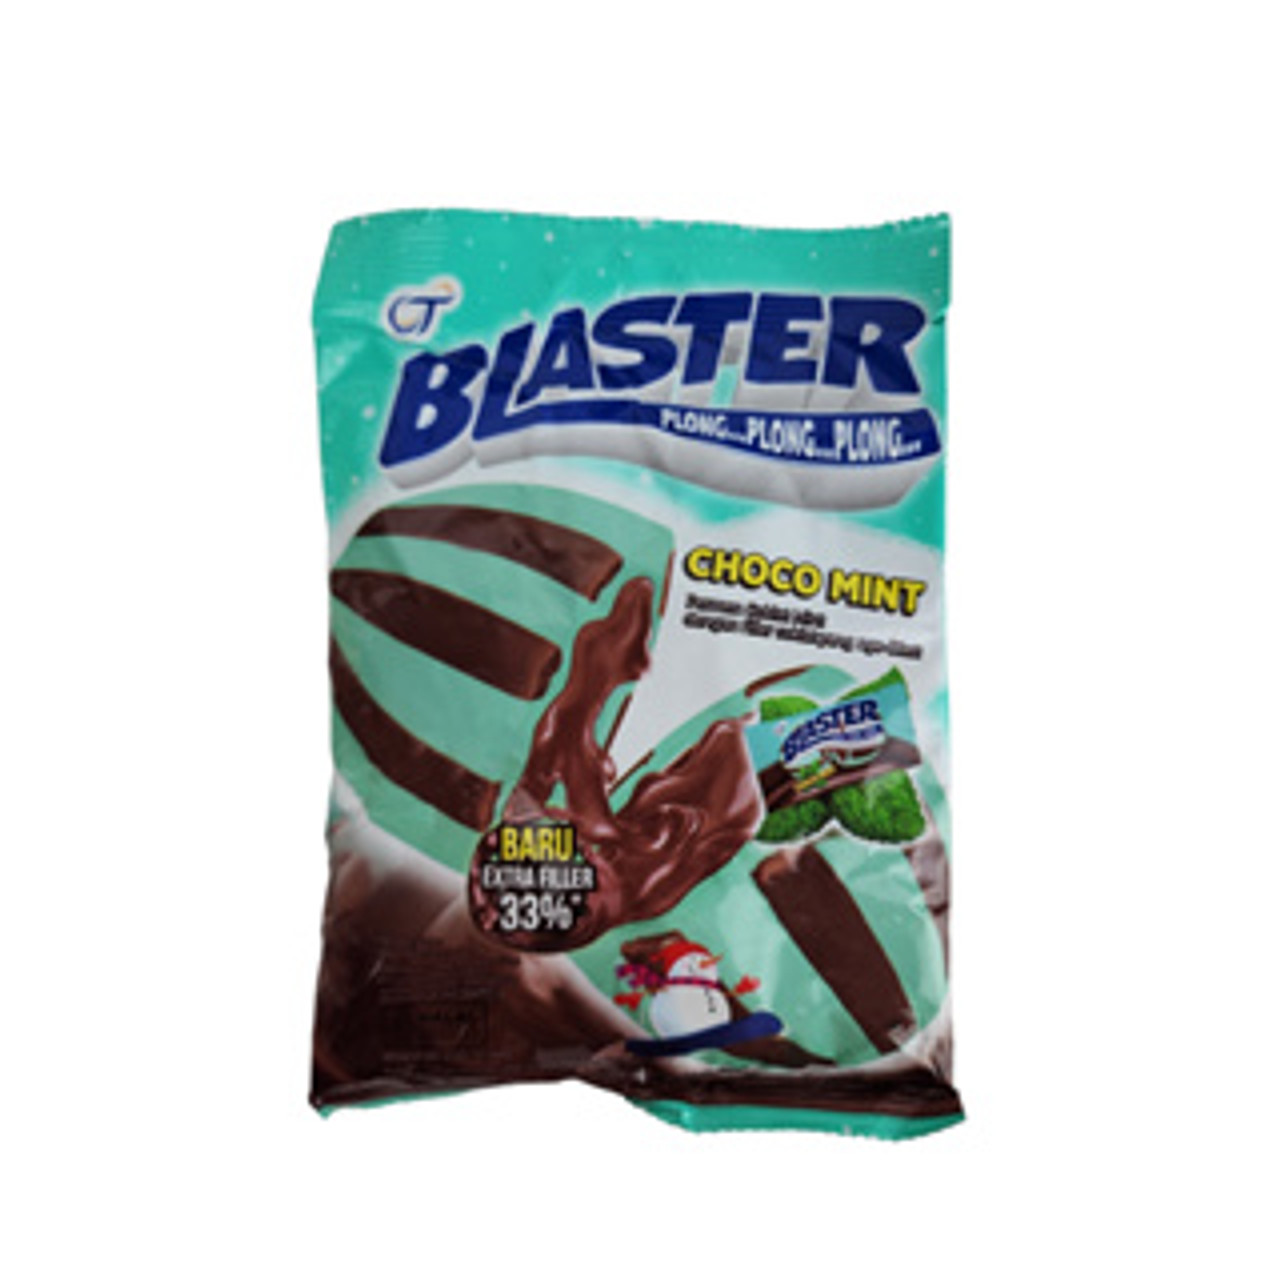 Chocolate Mint Candy Blaster, 125gr